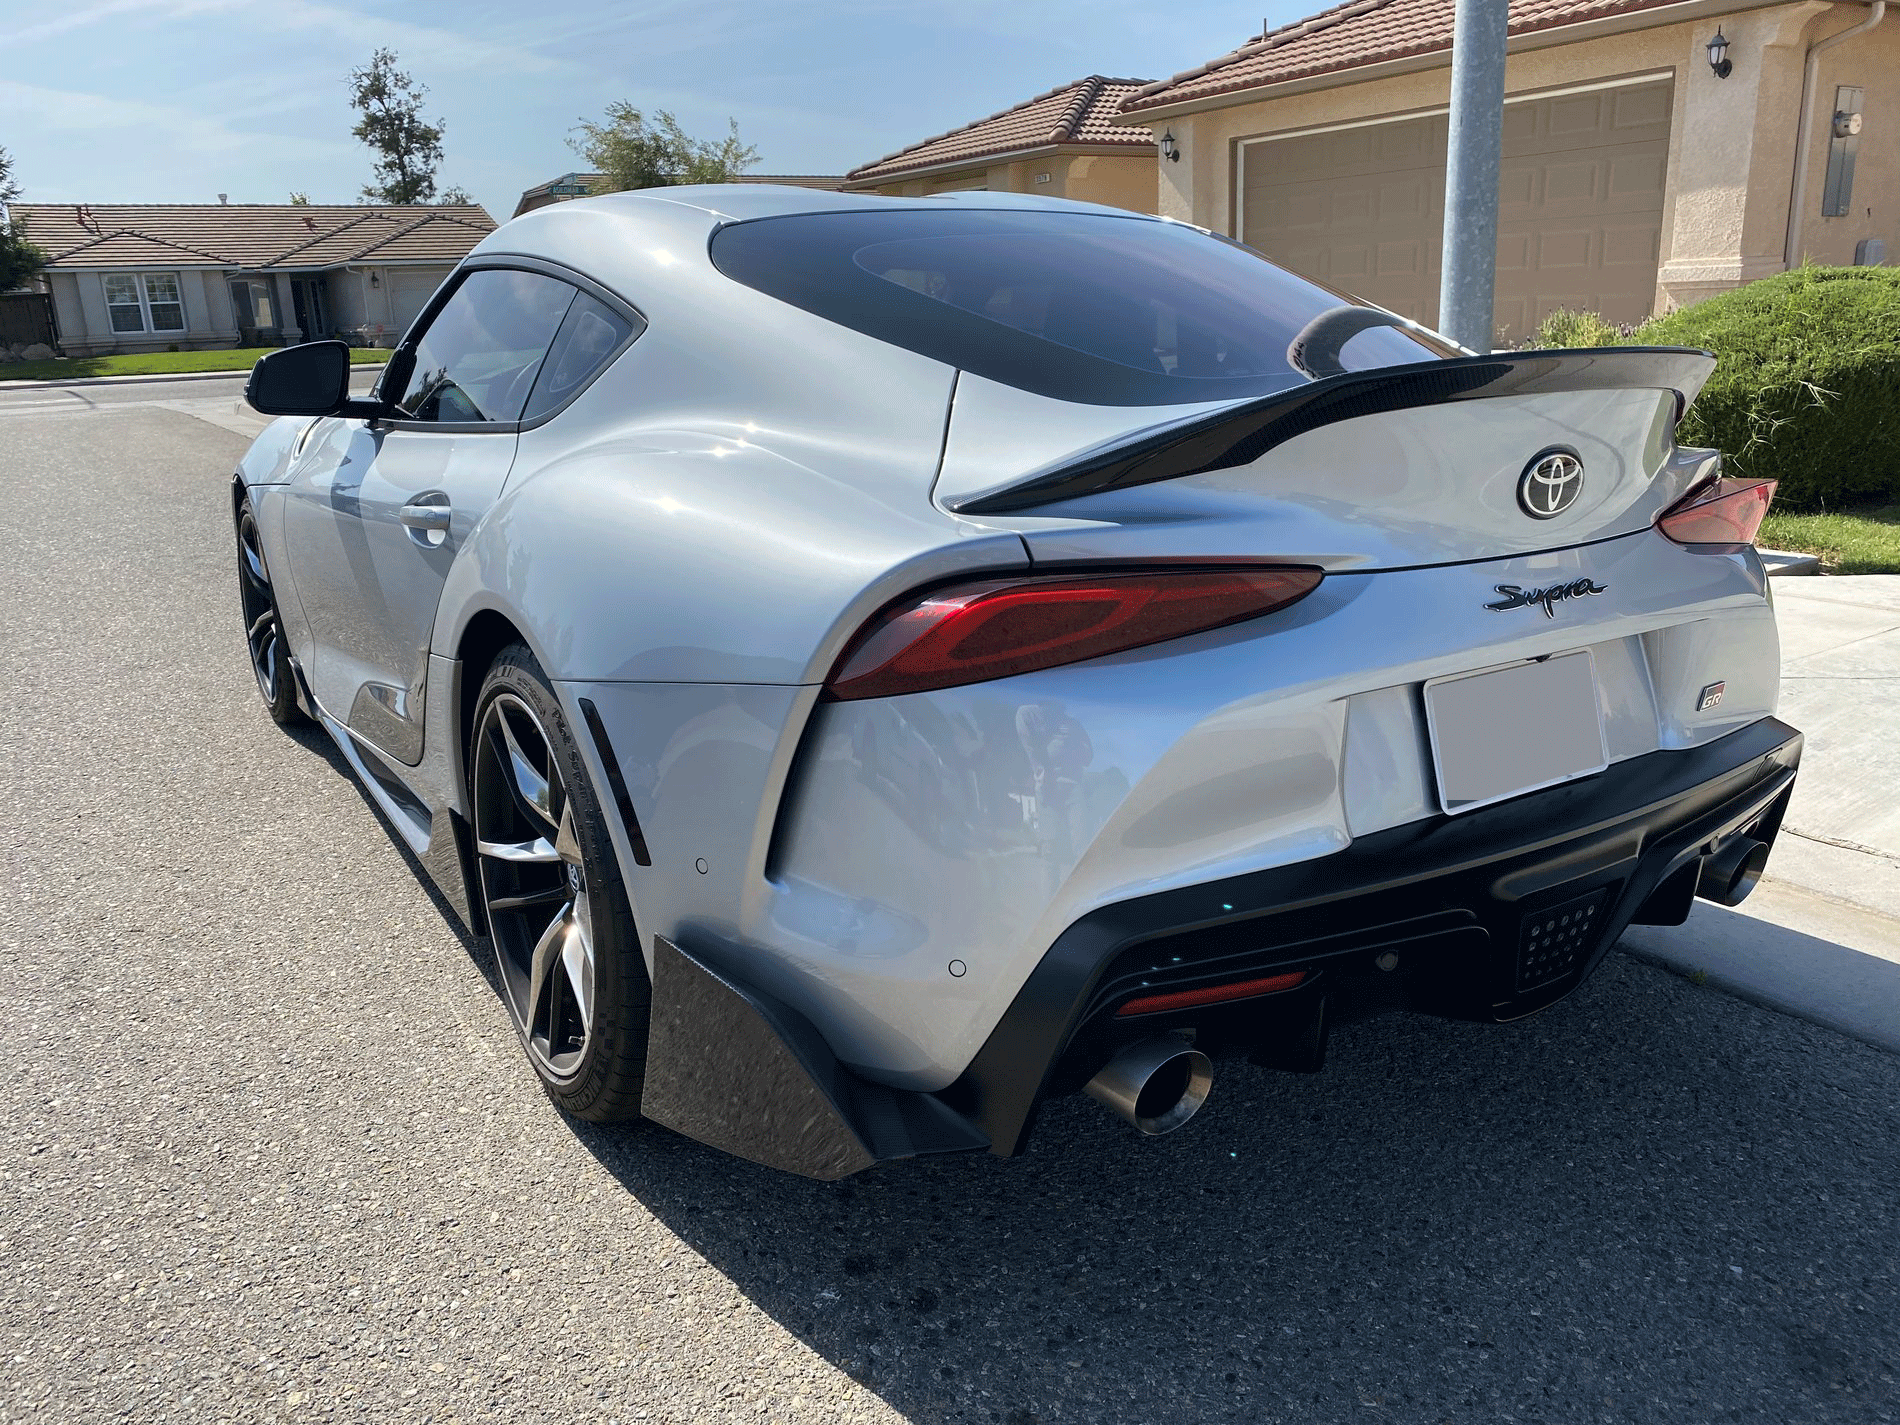 TRD-STYLE CARBON FIBER TRUNK WING FOR TOYOTA SUPRA A90 2019-2021,CARBON FIBER PARTS,NISSAN